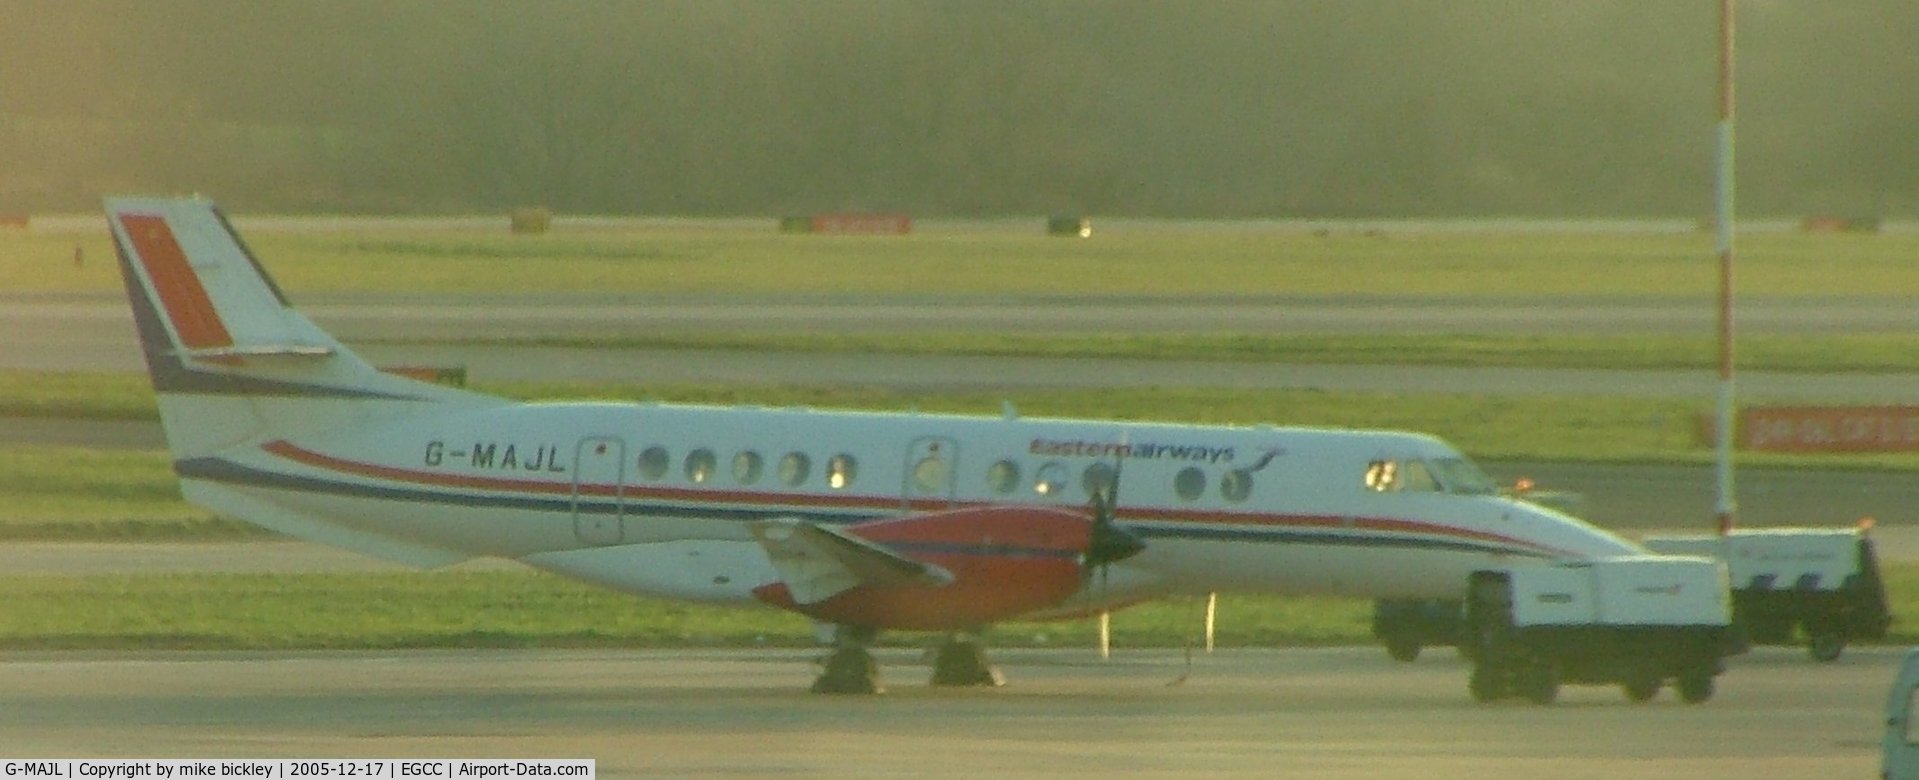 G-MAJL, 1996 British Aerospace Jetstream 41 C/N 41087, PARKED (SORRY FOR POOR QUALITY)